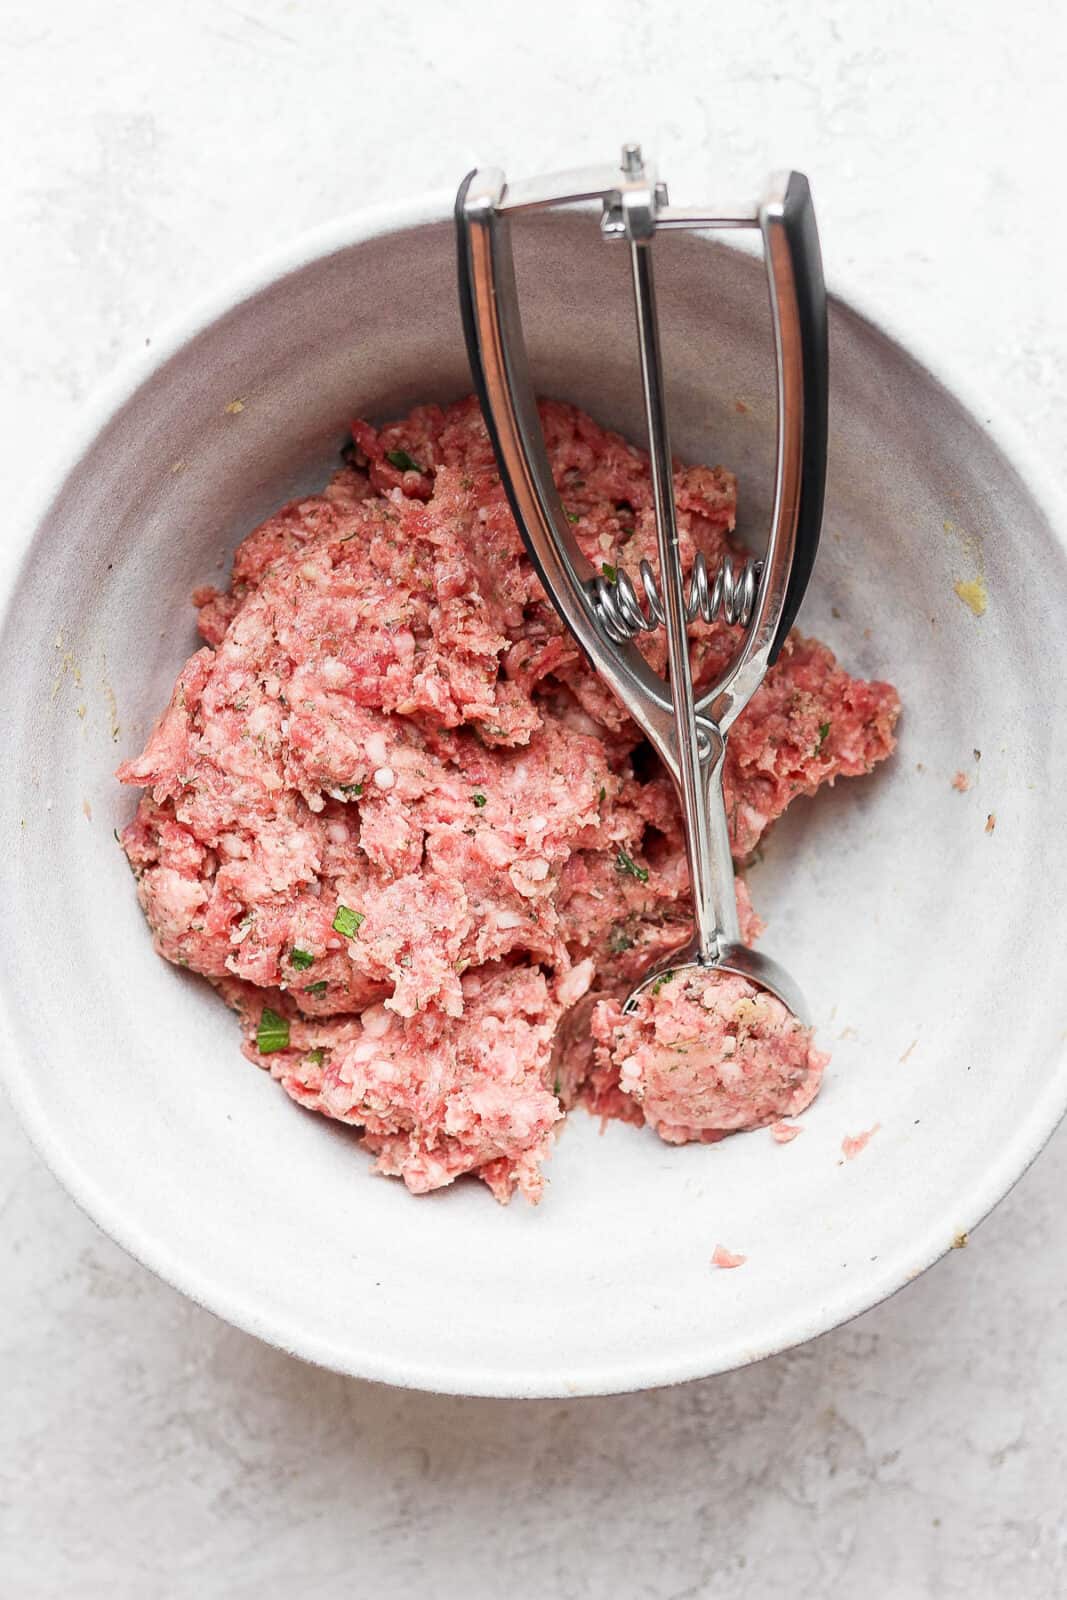 Lamb meatball ingredients mixed together in a bowl with a cookie scoop.